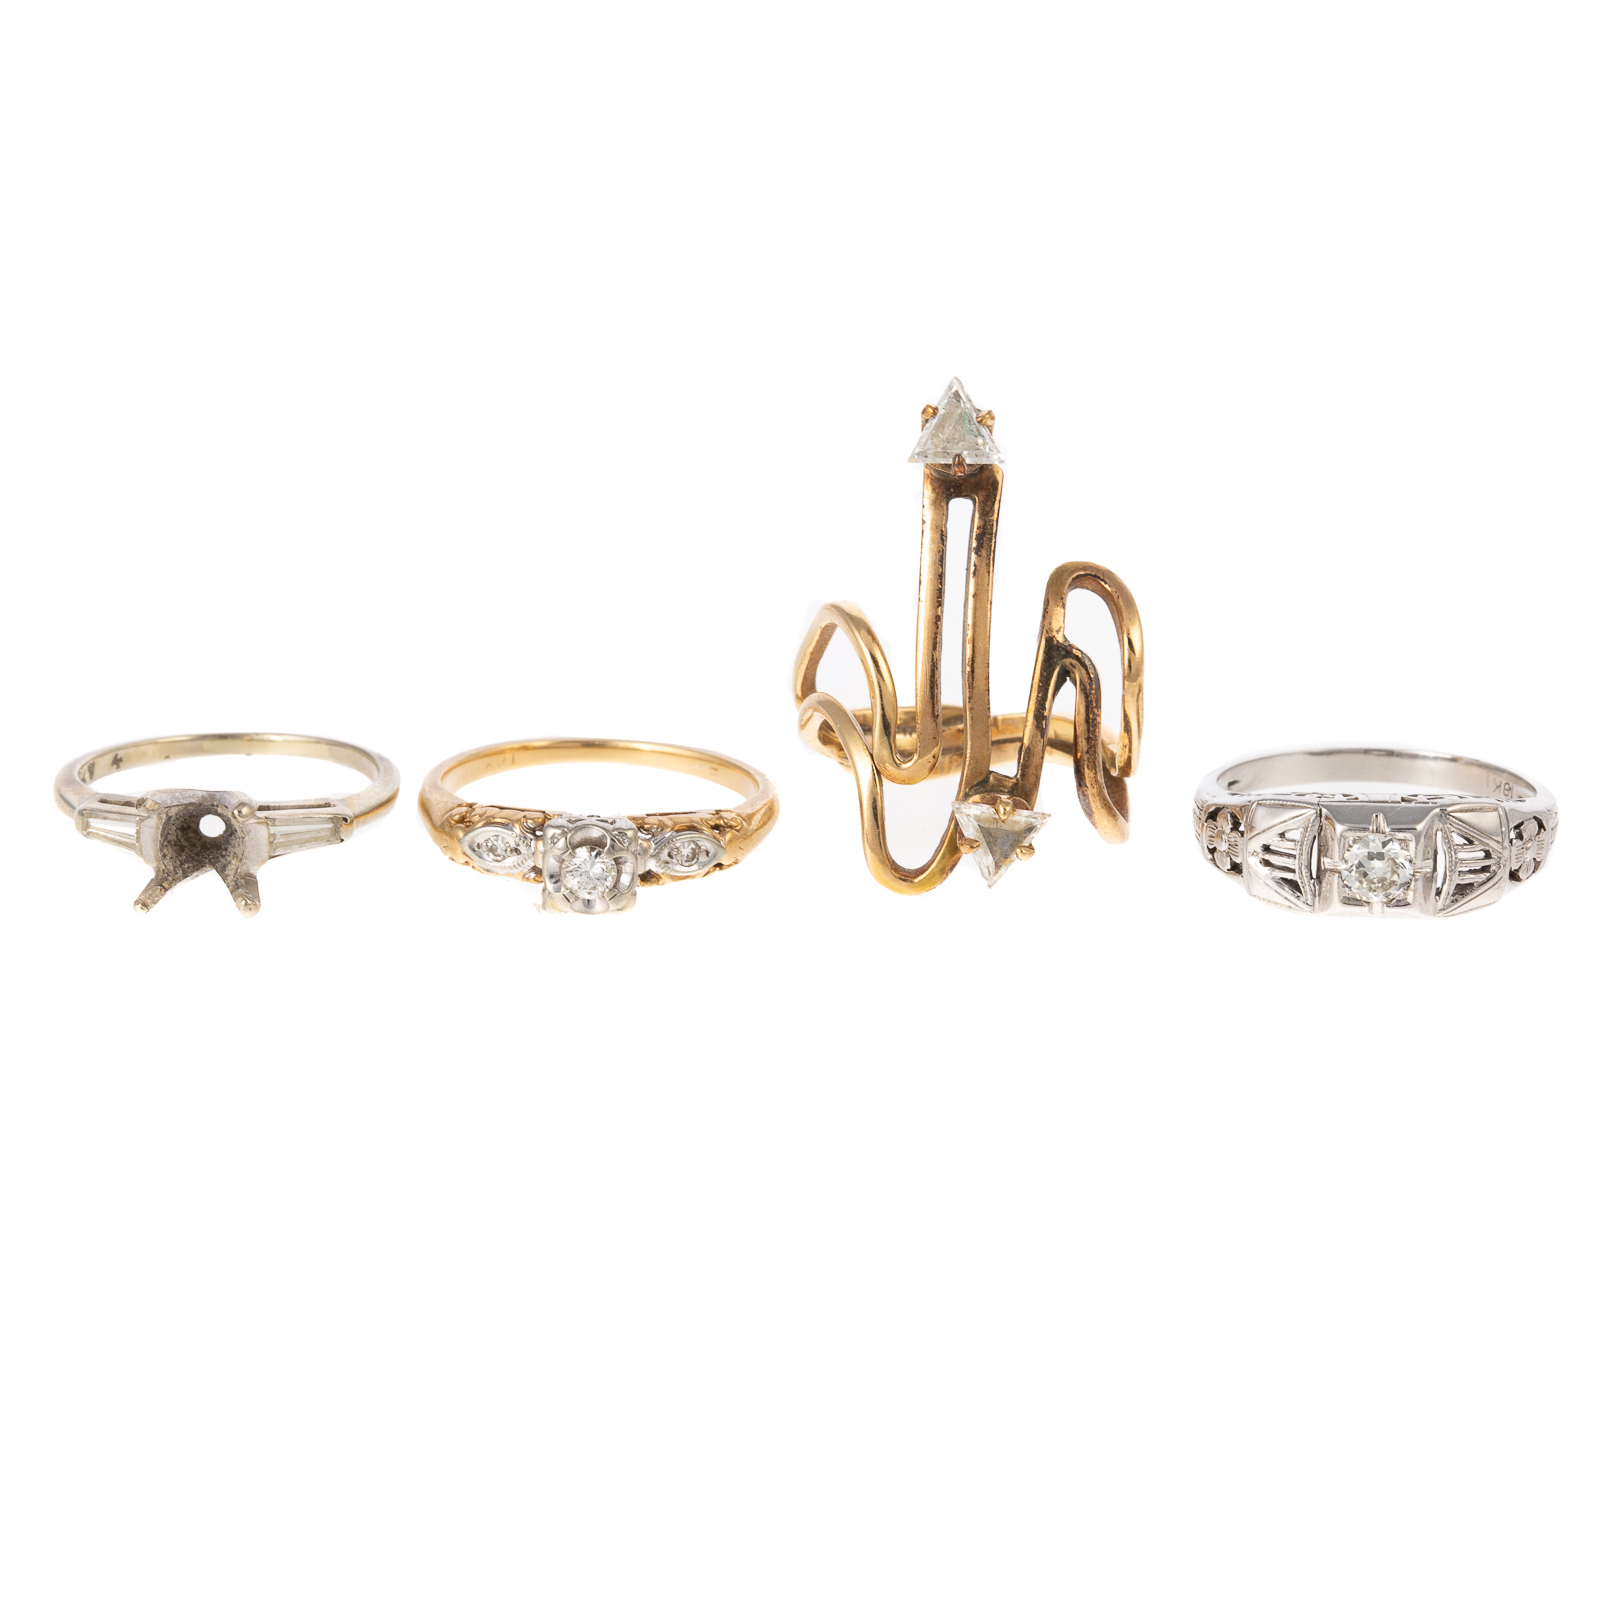 A COLLECTION OF DIAMOND RINGS IN 338db3